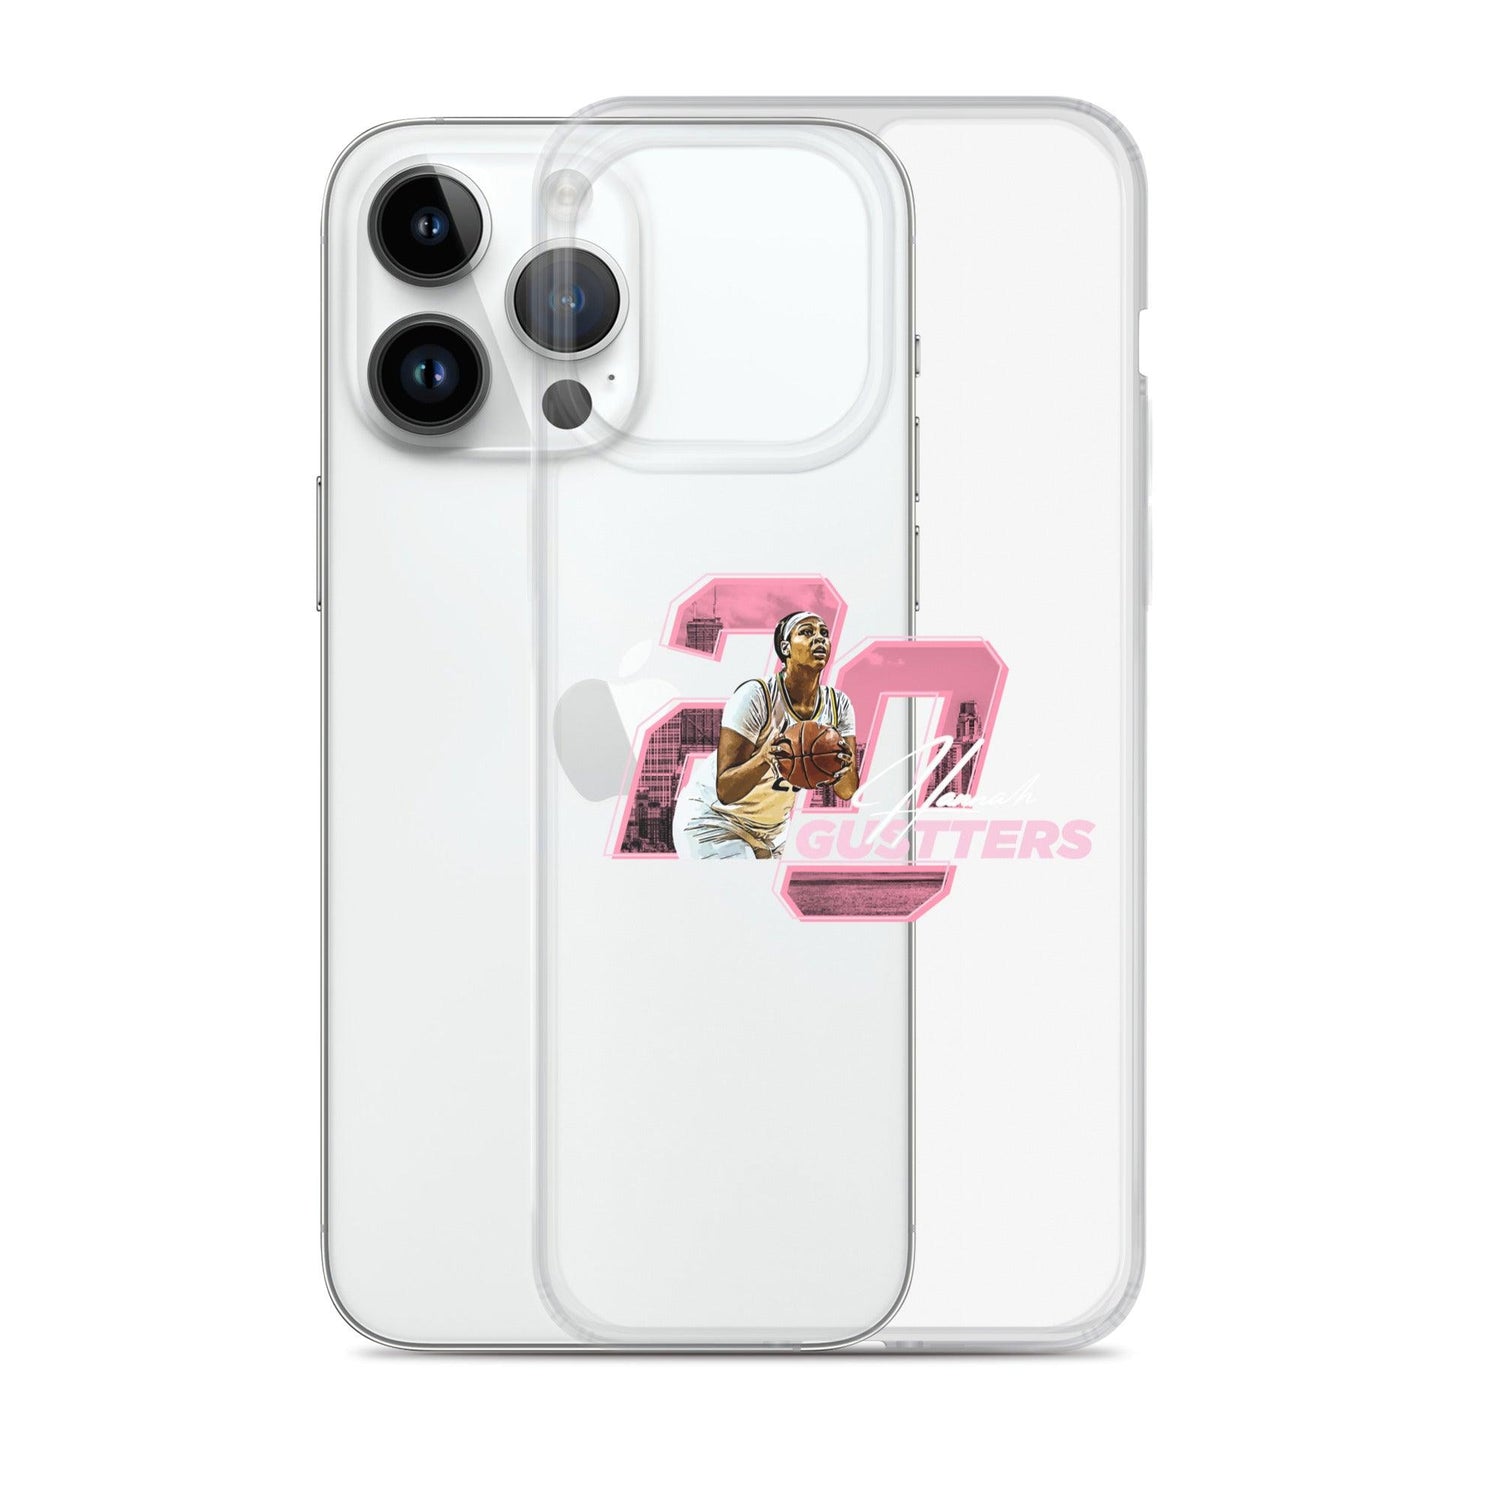 Hannah Gusters "Gameday" iPhone Case - Fan Arch